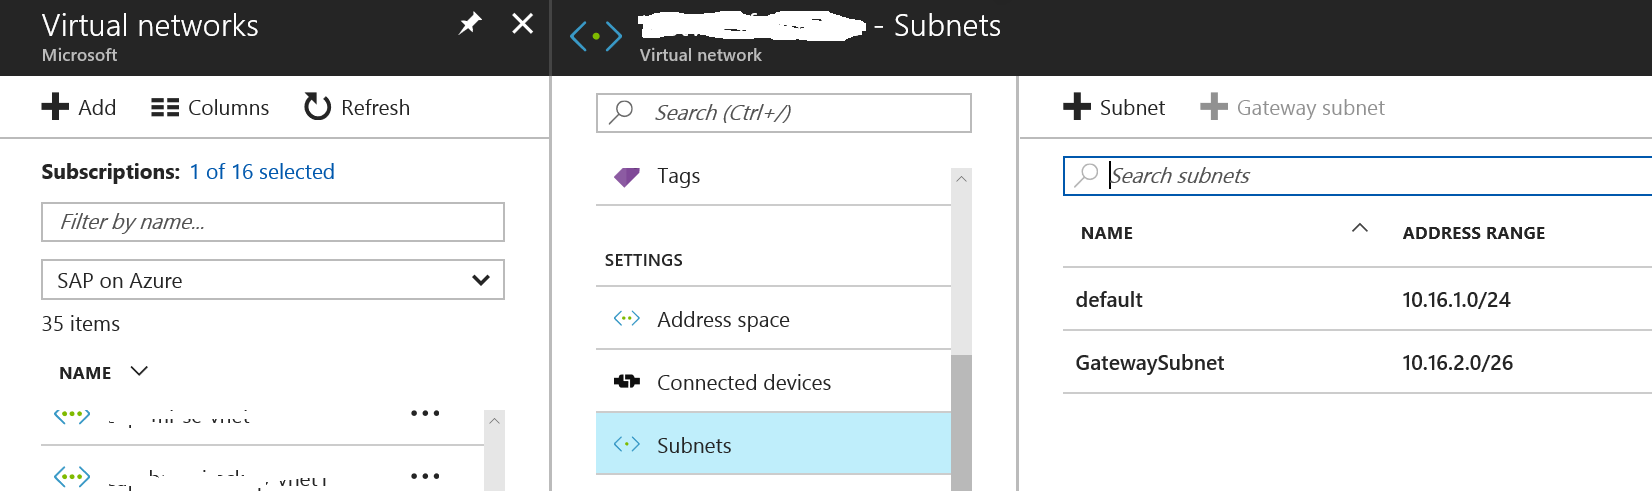 Azure virtual network subnets and their IP address ranges